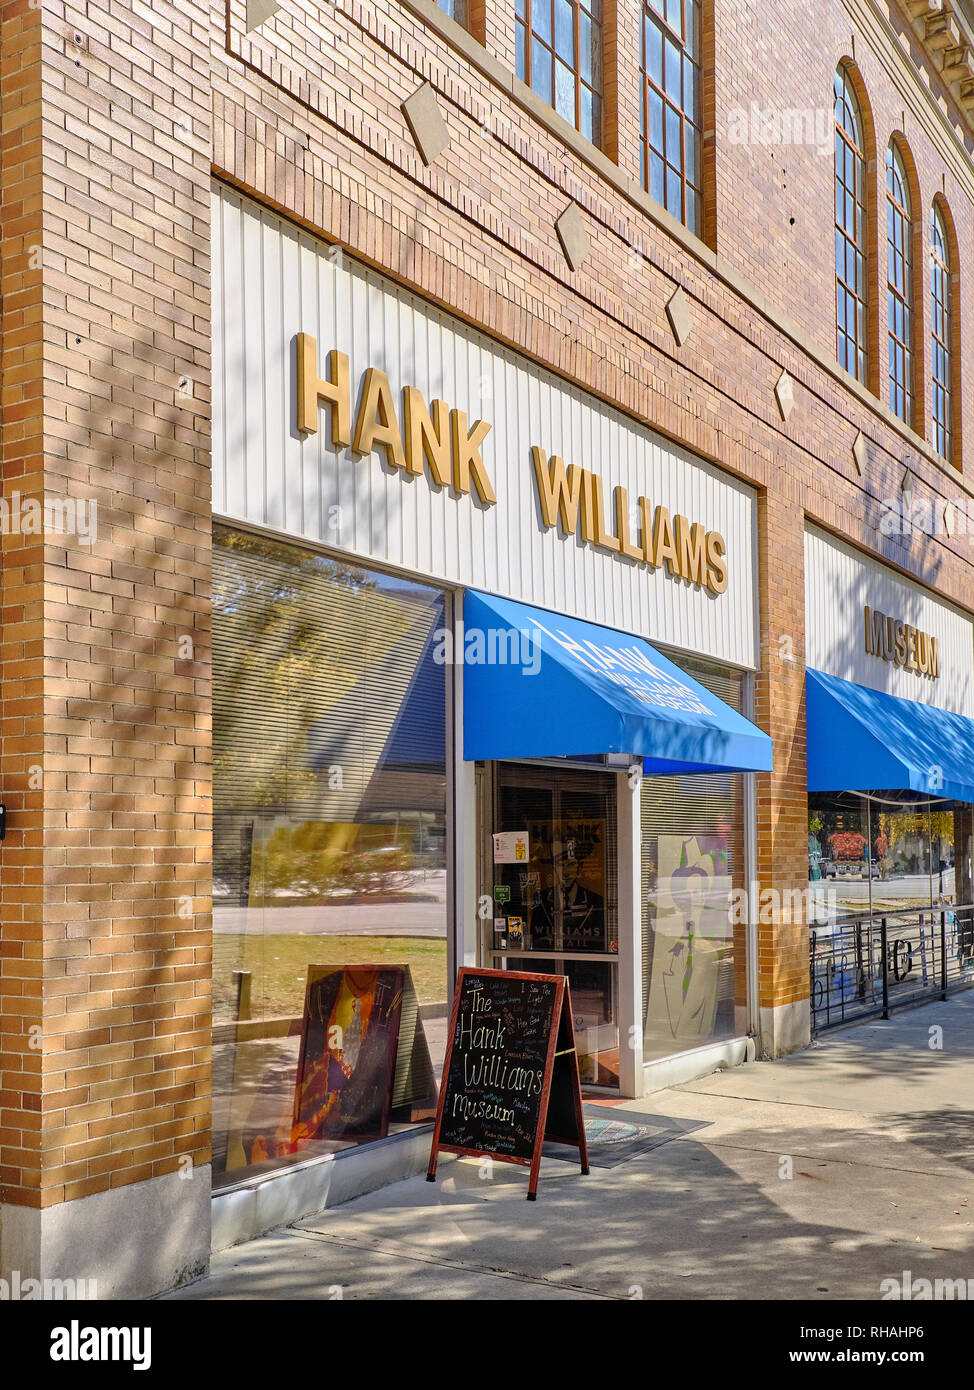 Hank Williams Museum, a country western music legend, front exterior entrance on Commerce Street in downtown Montgomery Alabama, USA. Stock Photo